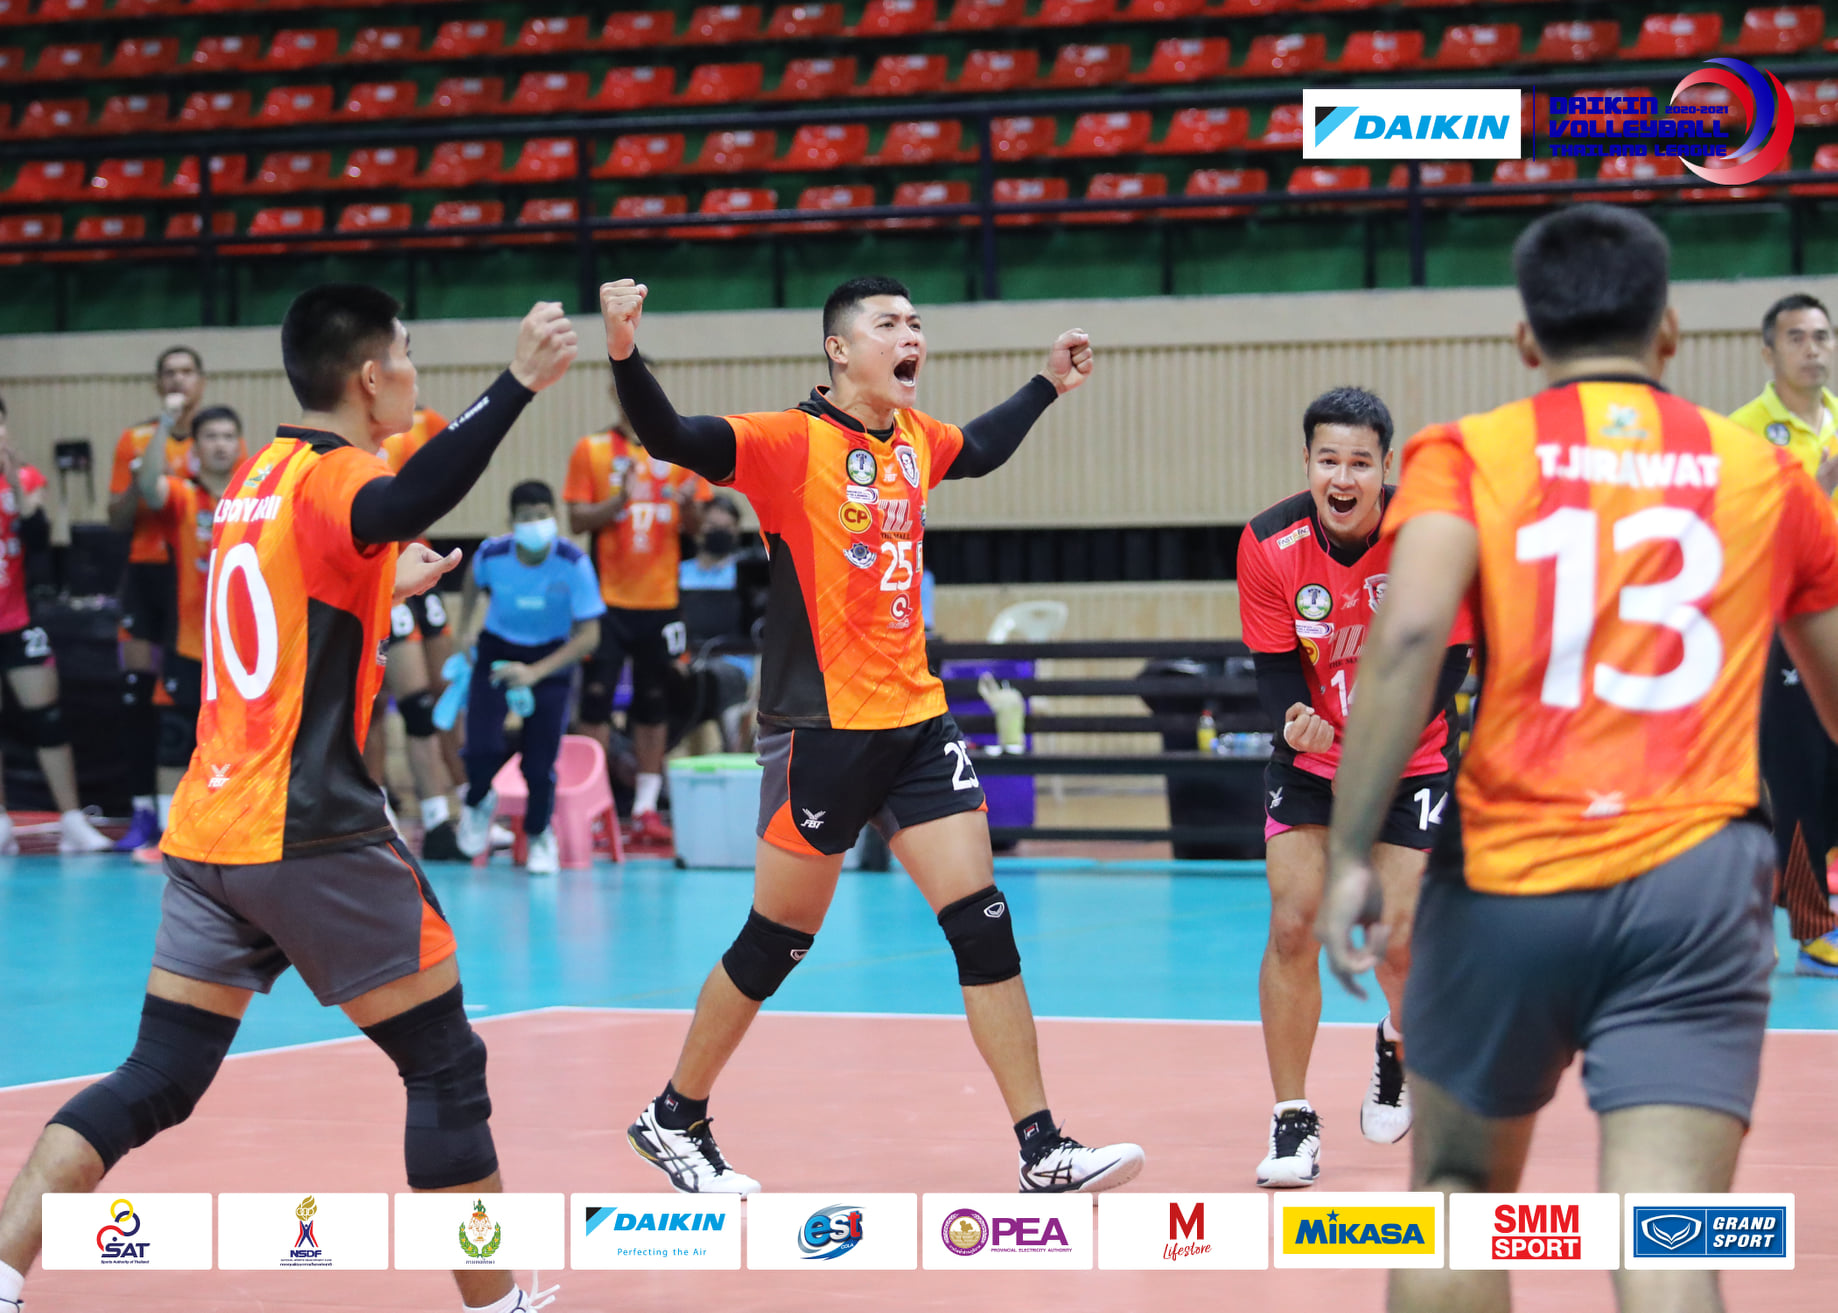 TITLE-HOLDERS NAKHON RATCHASIMA, SUPREME OFF TO WINNING STARTS IN THAILAND VOLLEYBALL LEAGUE